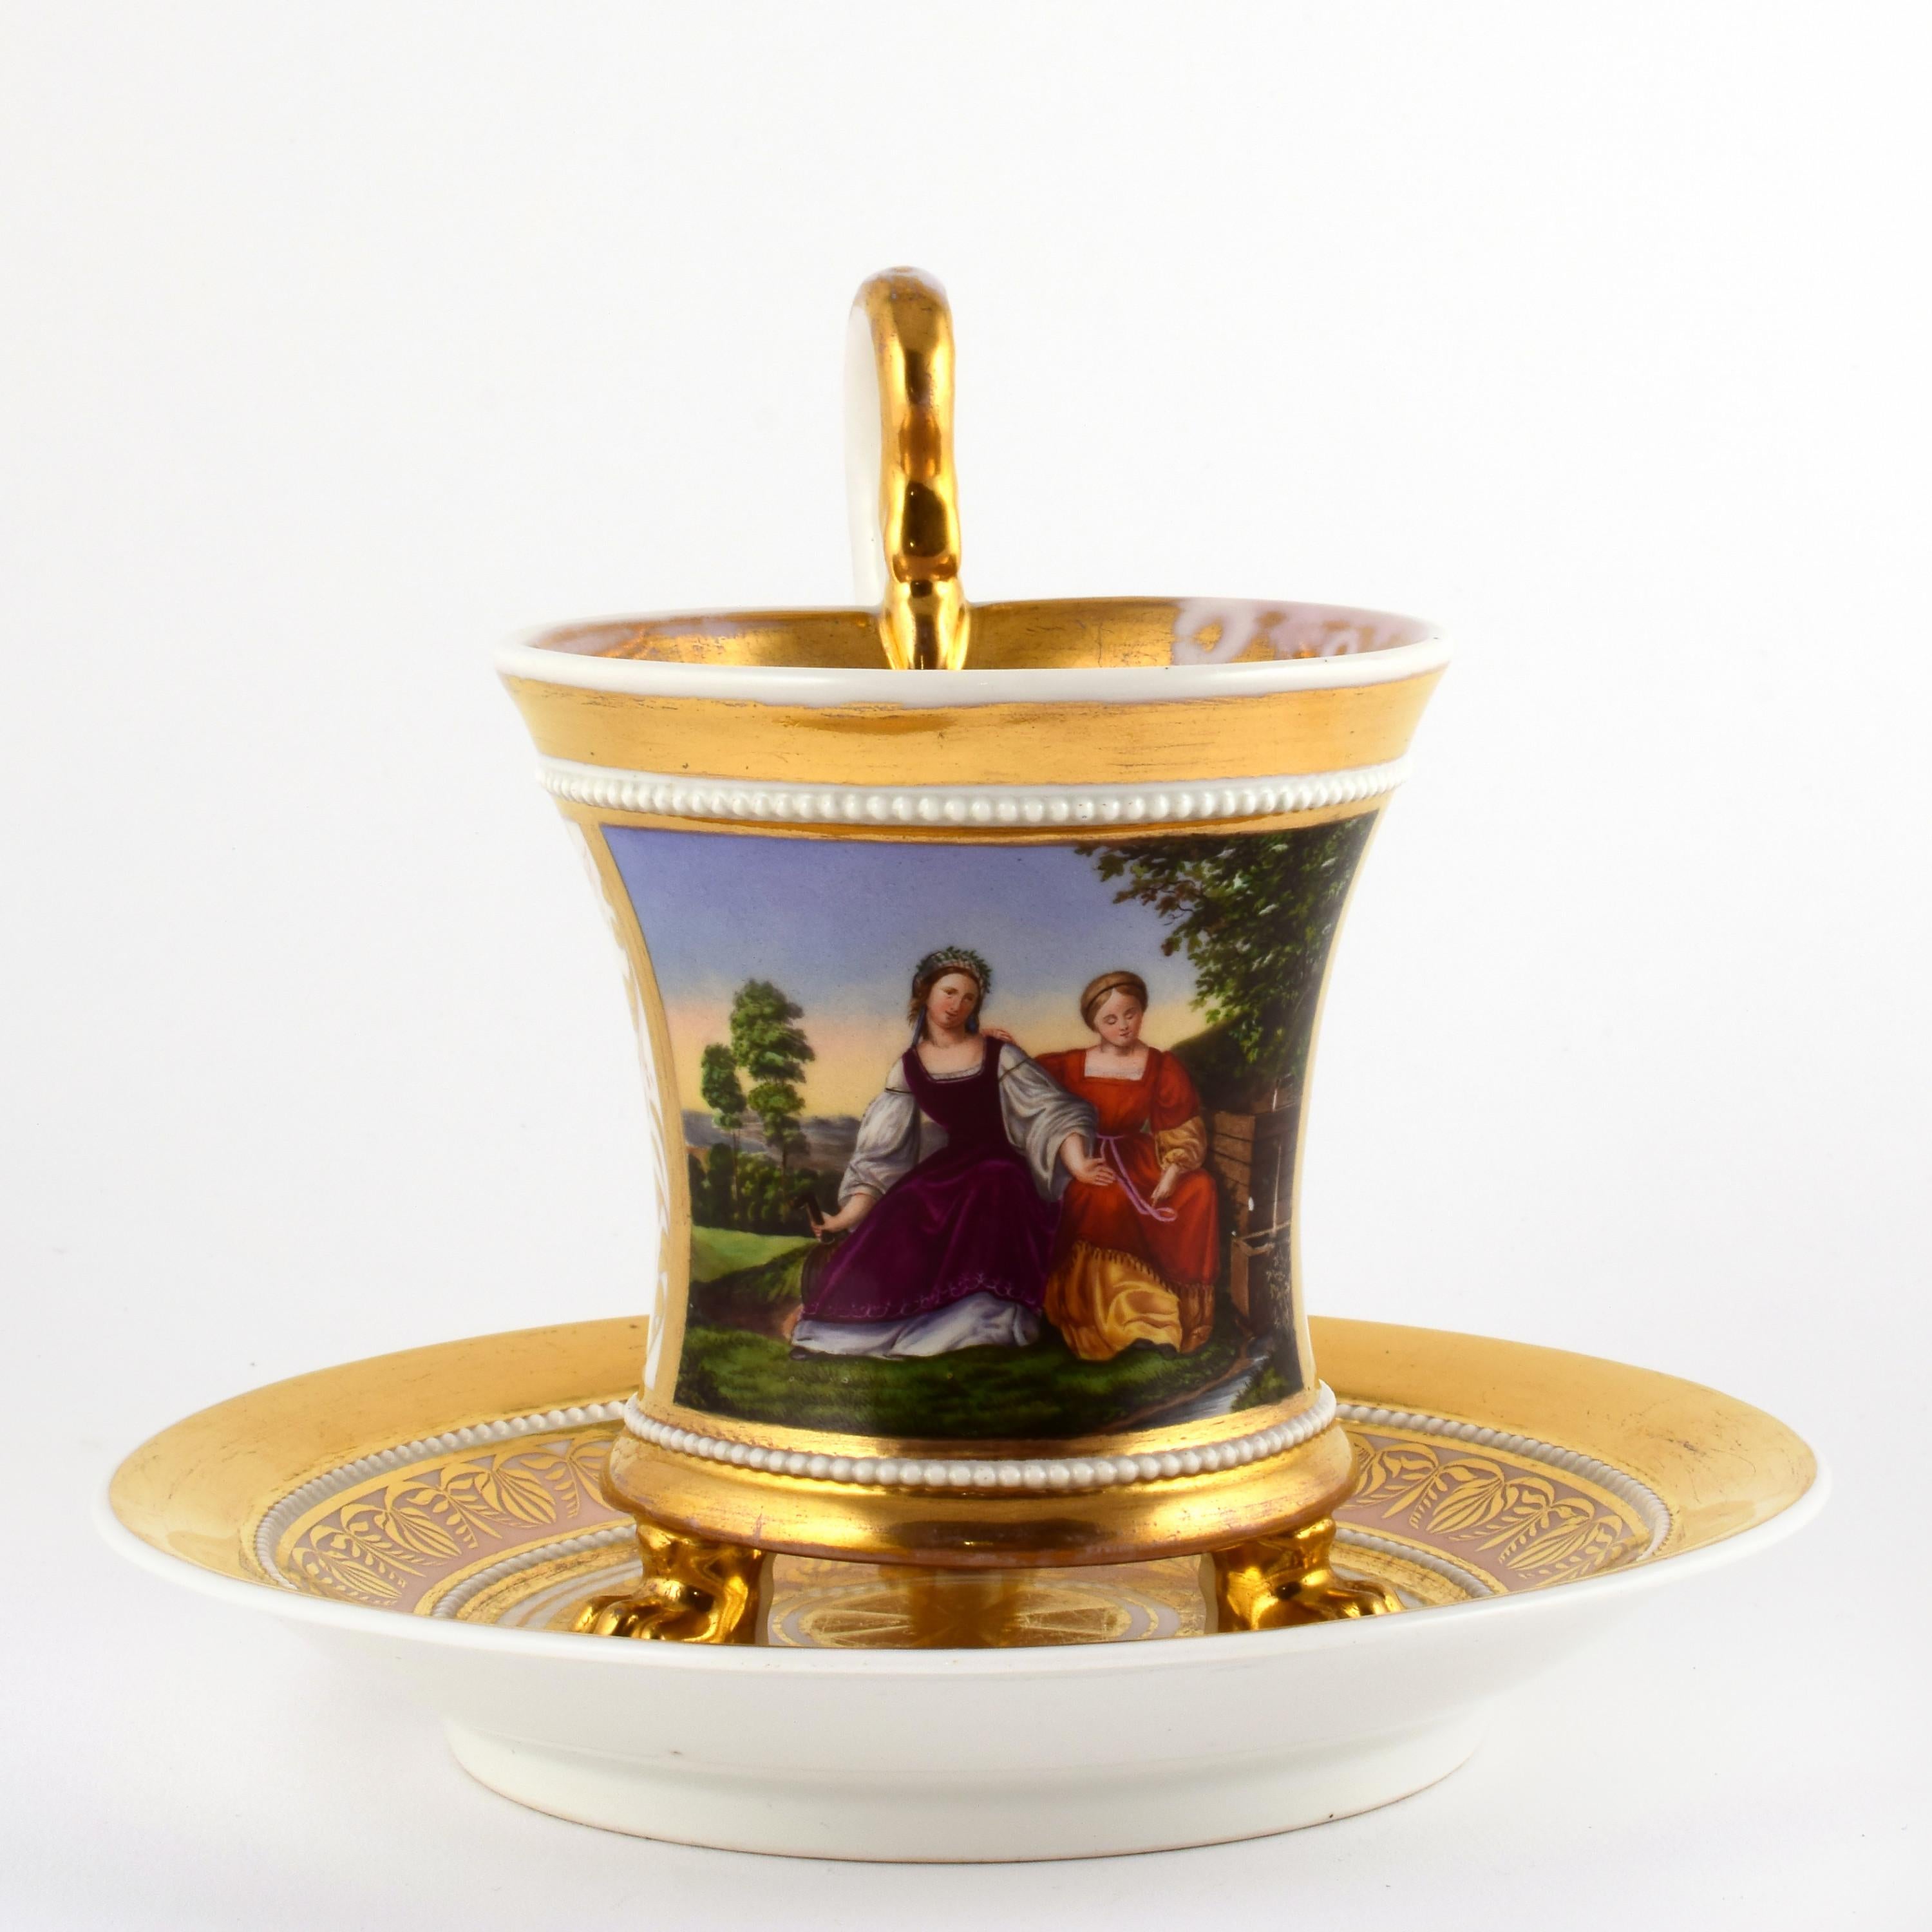 KPM Porcelain cup decorated with a finely hand painted depiction of two women in nature. Inside with gilding (light wear to the gilding).
KPM (Königliche Porzellan-Manufaktur Berlin) was founded in 1751, Berlin.